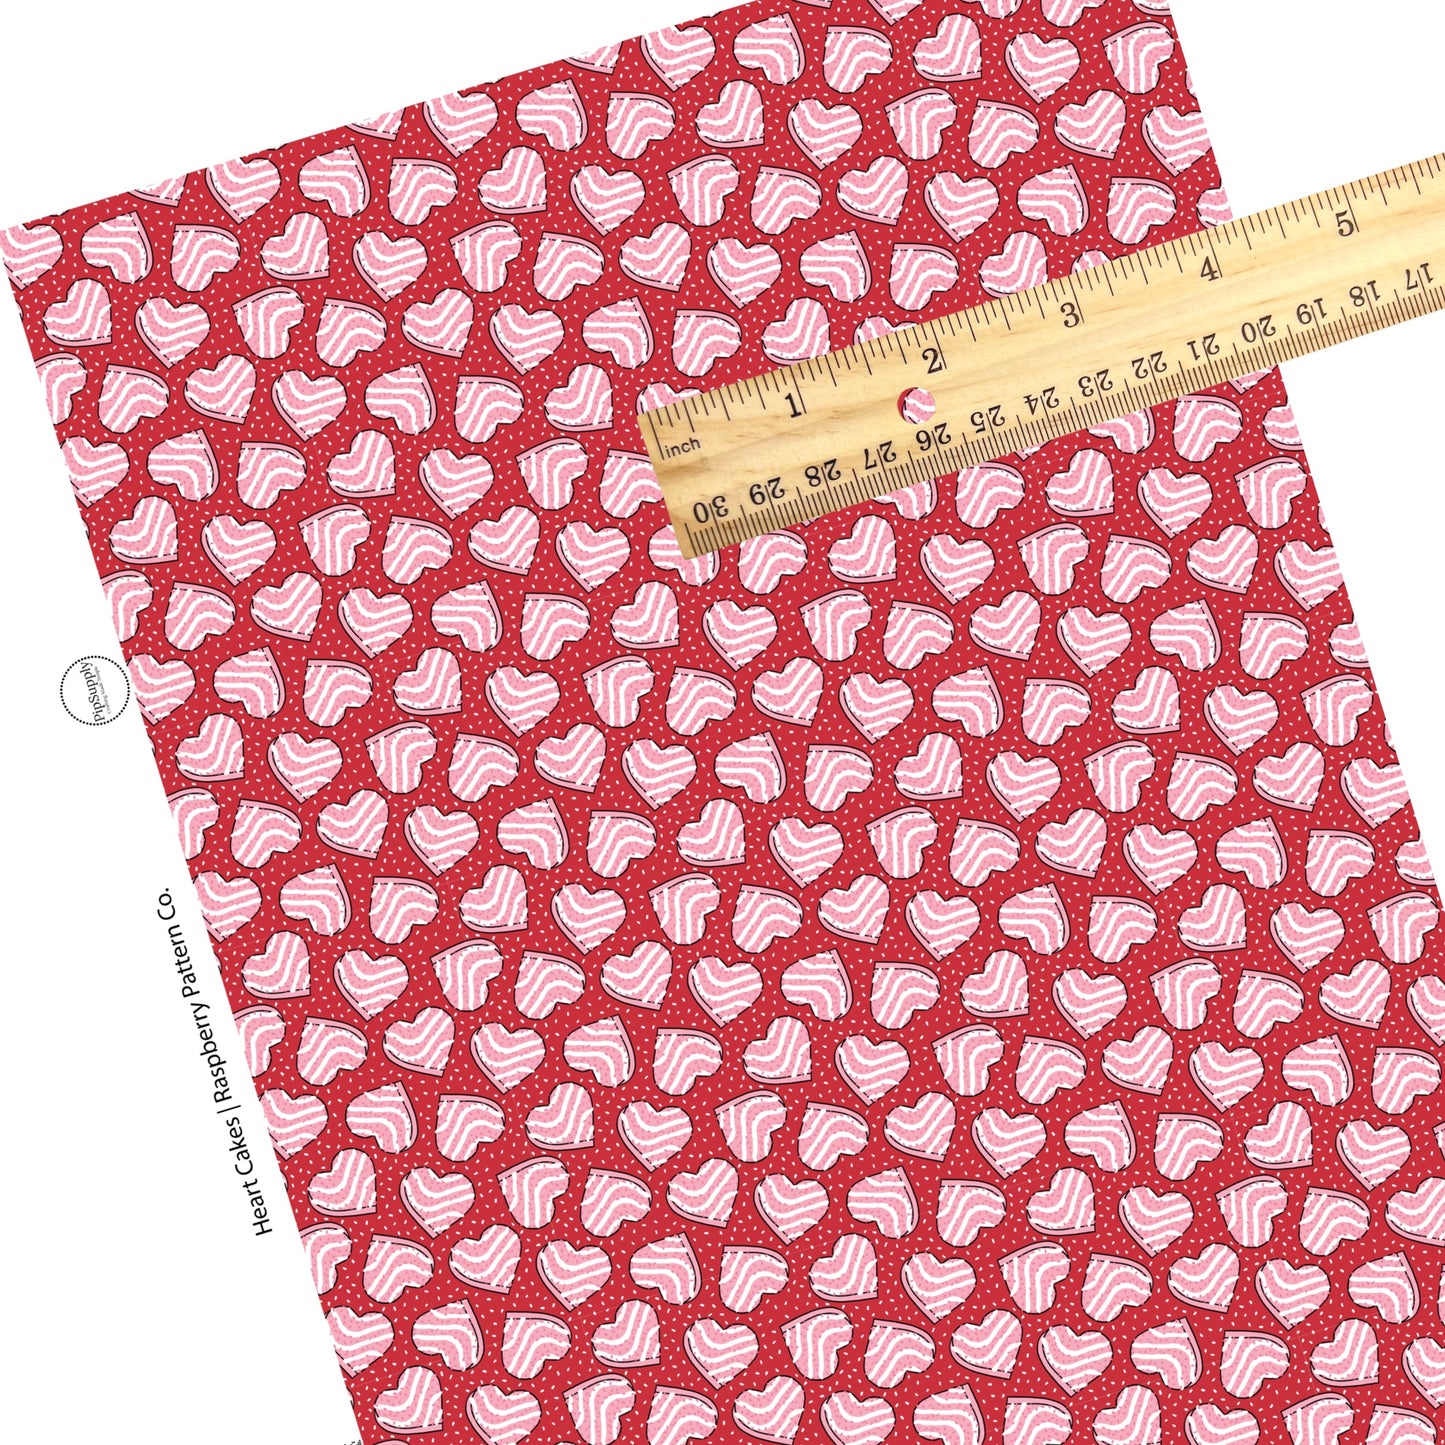 These Valentine's pattern themed faux leather sheets contain the following design elements: pink heart shaped cakes surrounded by white sprinkles on red. Our CPSIA compliant faux leather sheets or rolls can be used for all types of crafting projects.